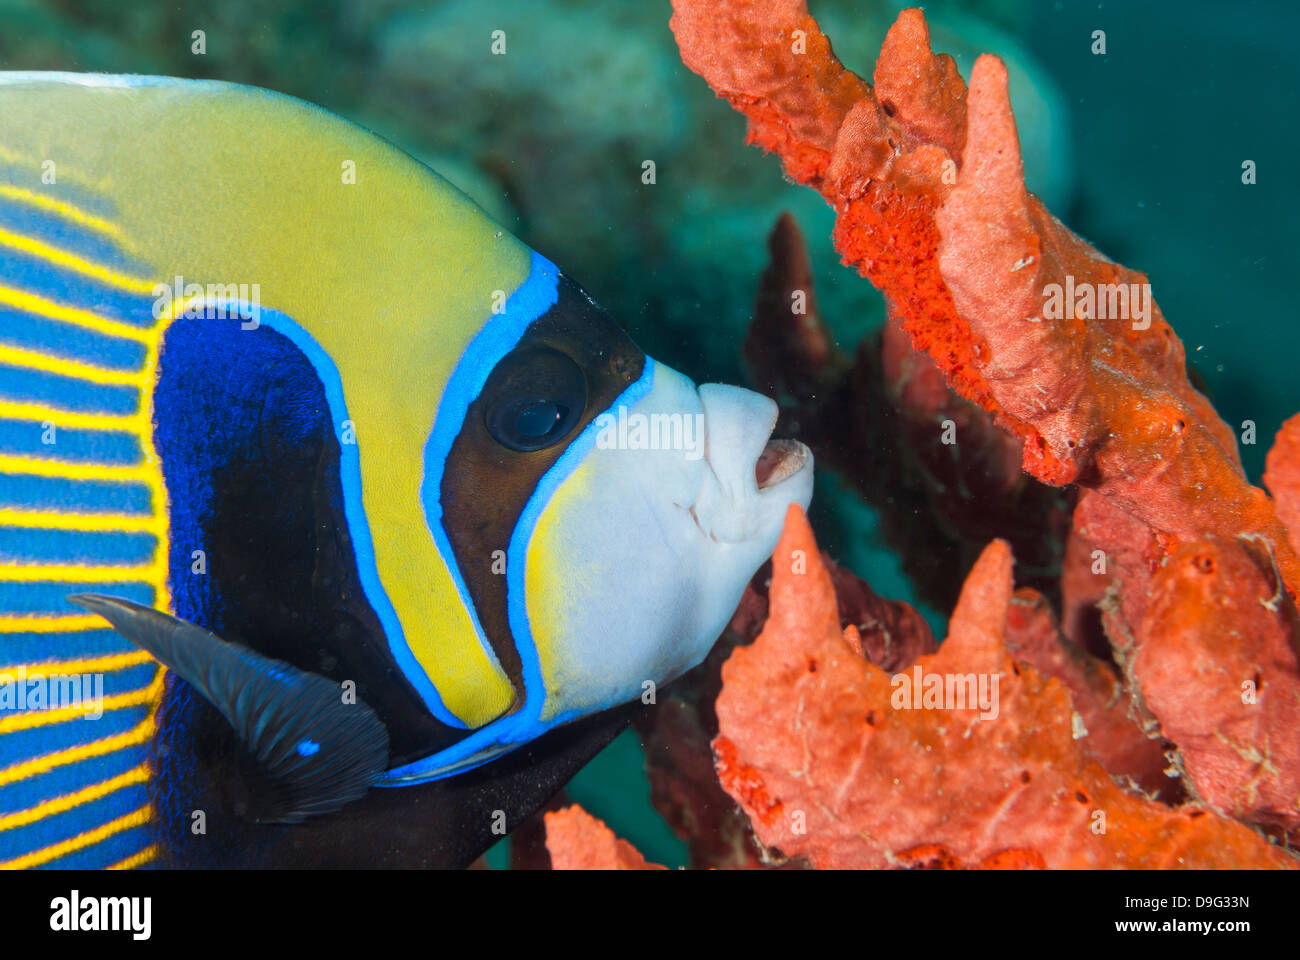 Emperor angelfish (Pomacanthus imperator) close-up, Naama Bay, off Sharm el-Sheikh, Sinai, Red Sea, Egypt, Africa Stock Photo